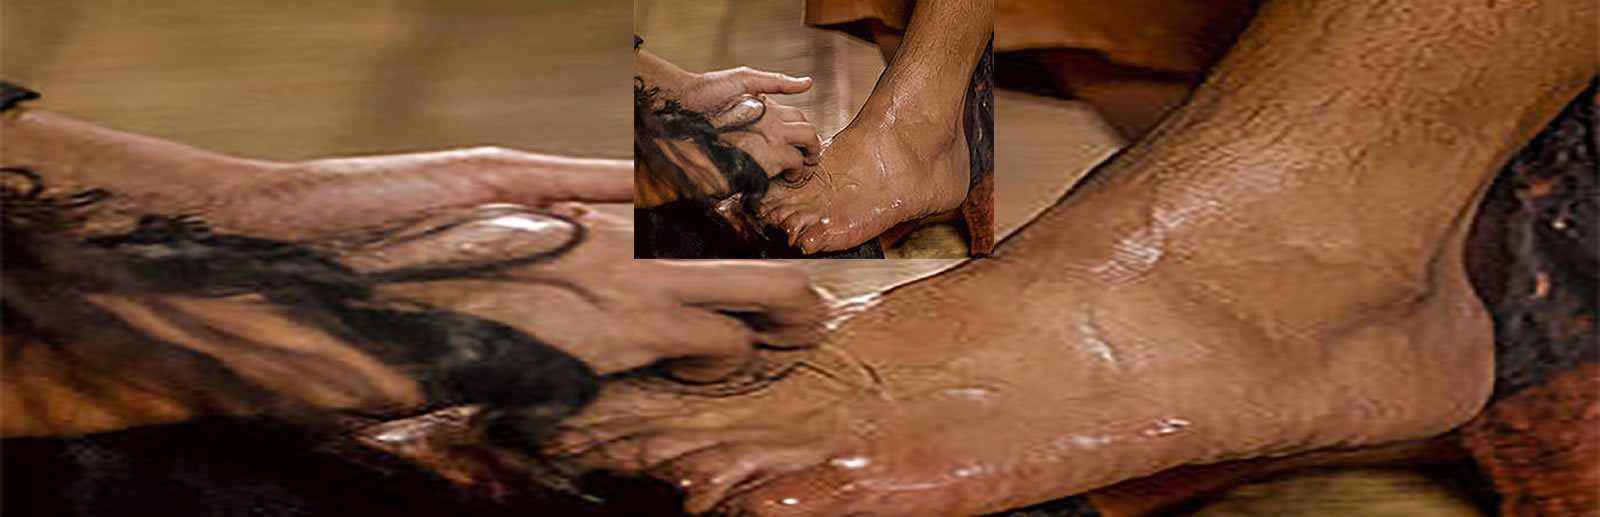 Illustration : Jesus' feet being washed by the woman